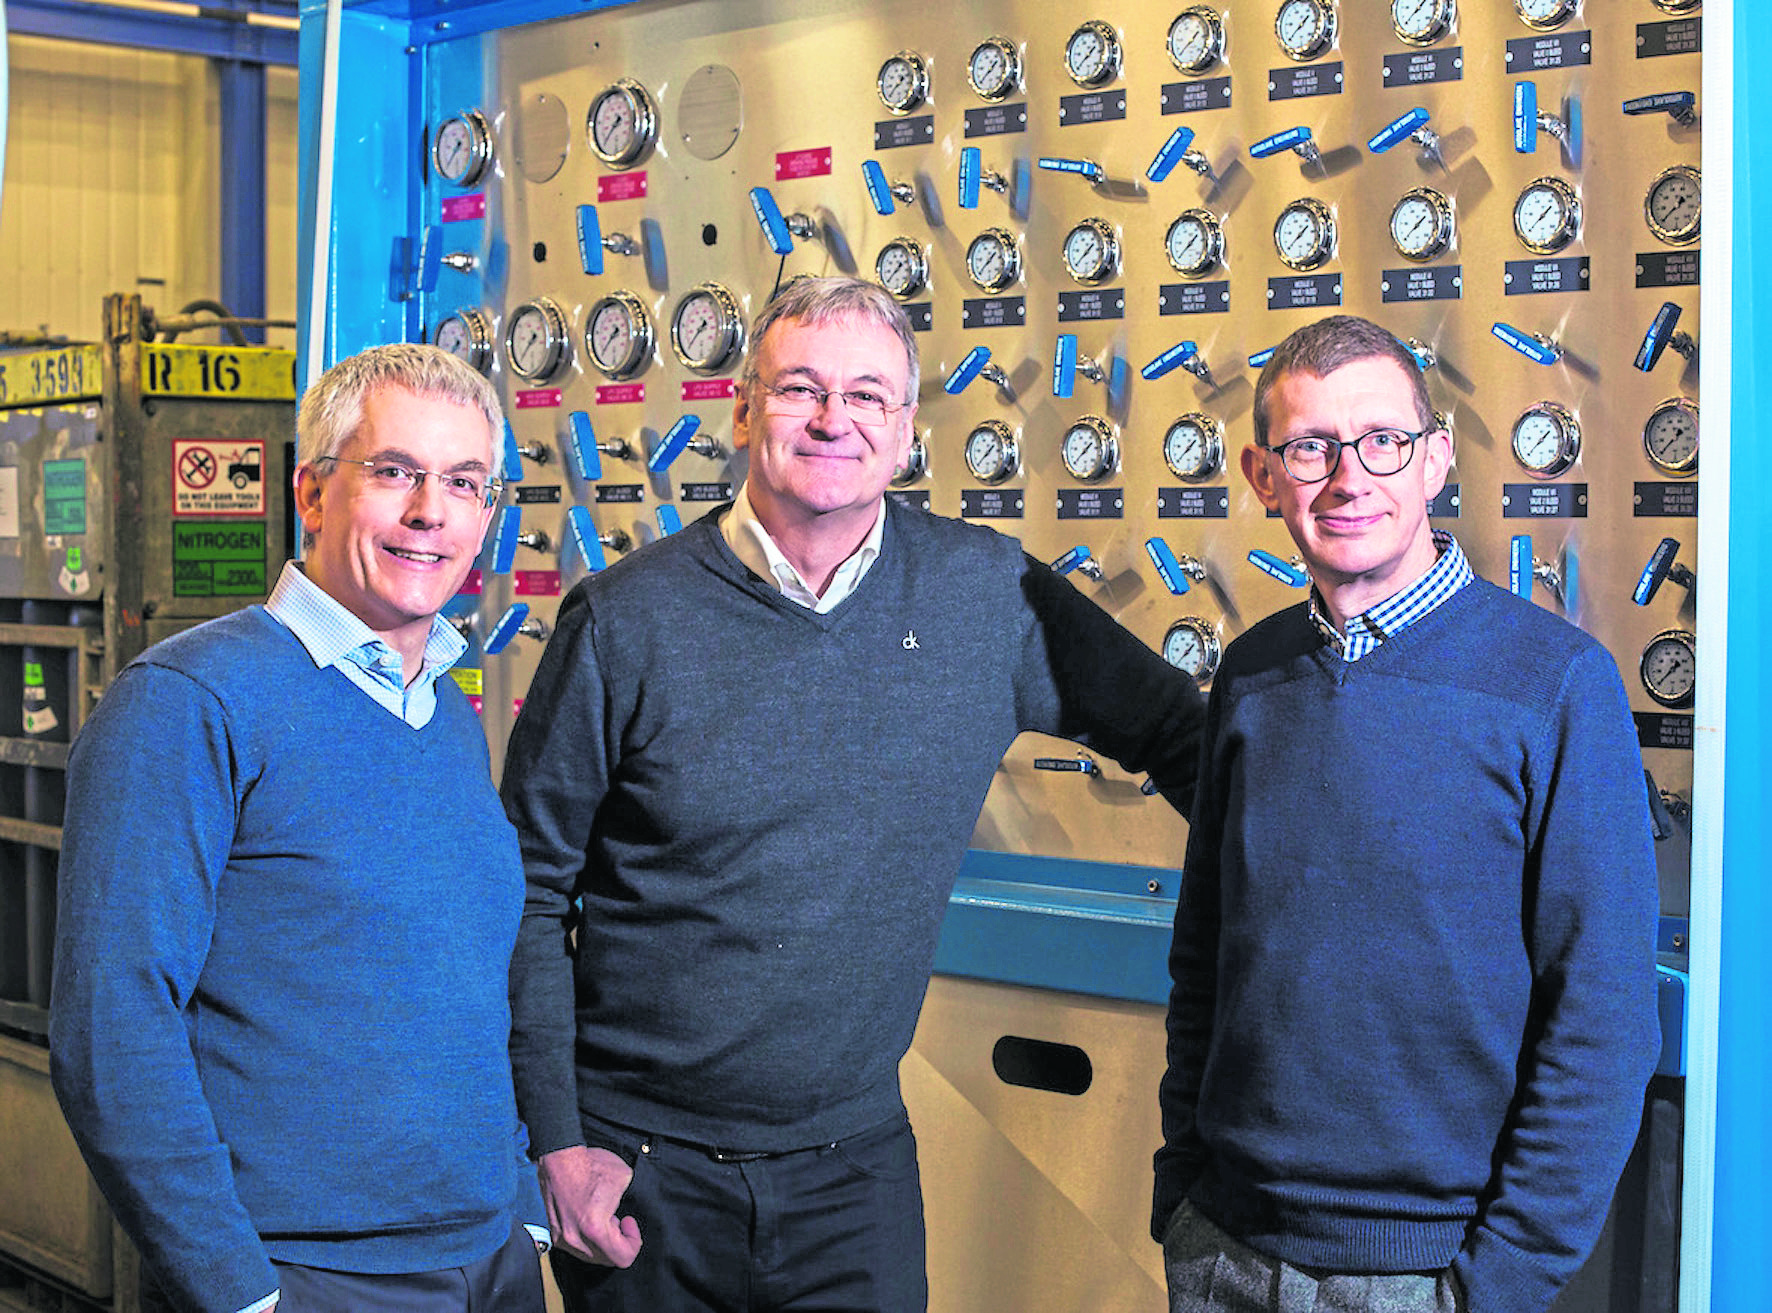 BGF invests £10m in Frontrow Energy Technology Group 
from left to right: Mike Sibson (BGF), Graeme Coutts (FrontRow Chairman), Stuart Ferguson (FrontRow CEO).